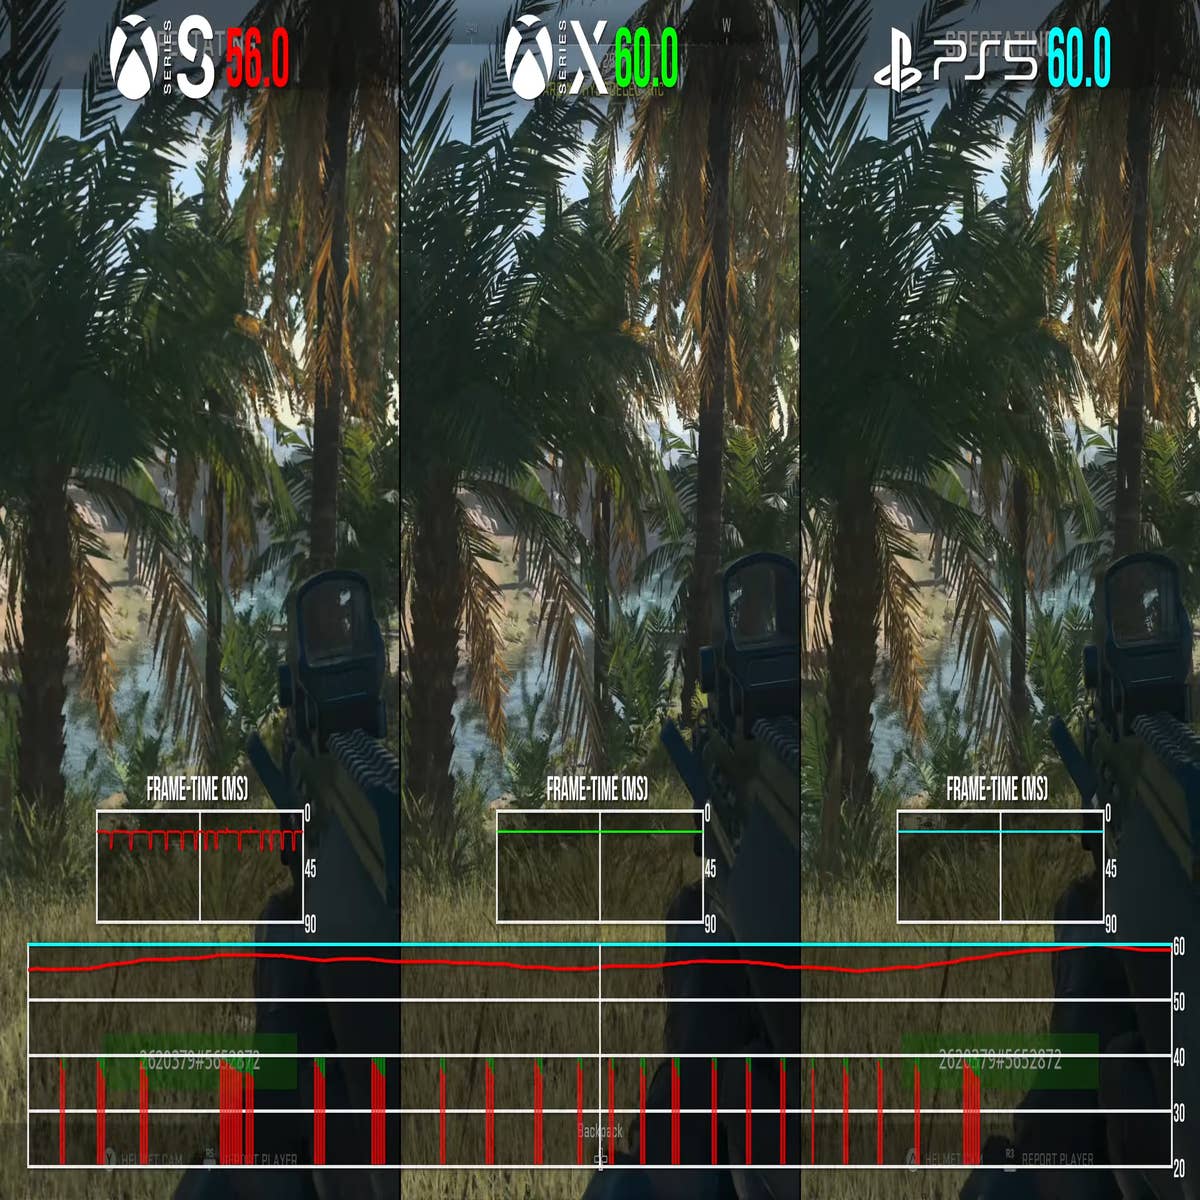 How to Show FPS in Warzone 2.0 - Check Performance